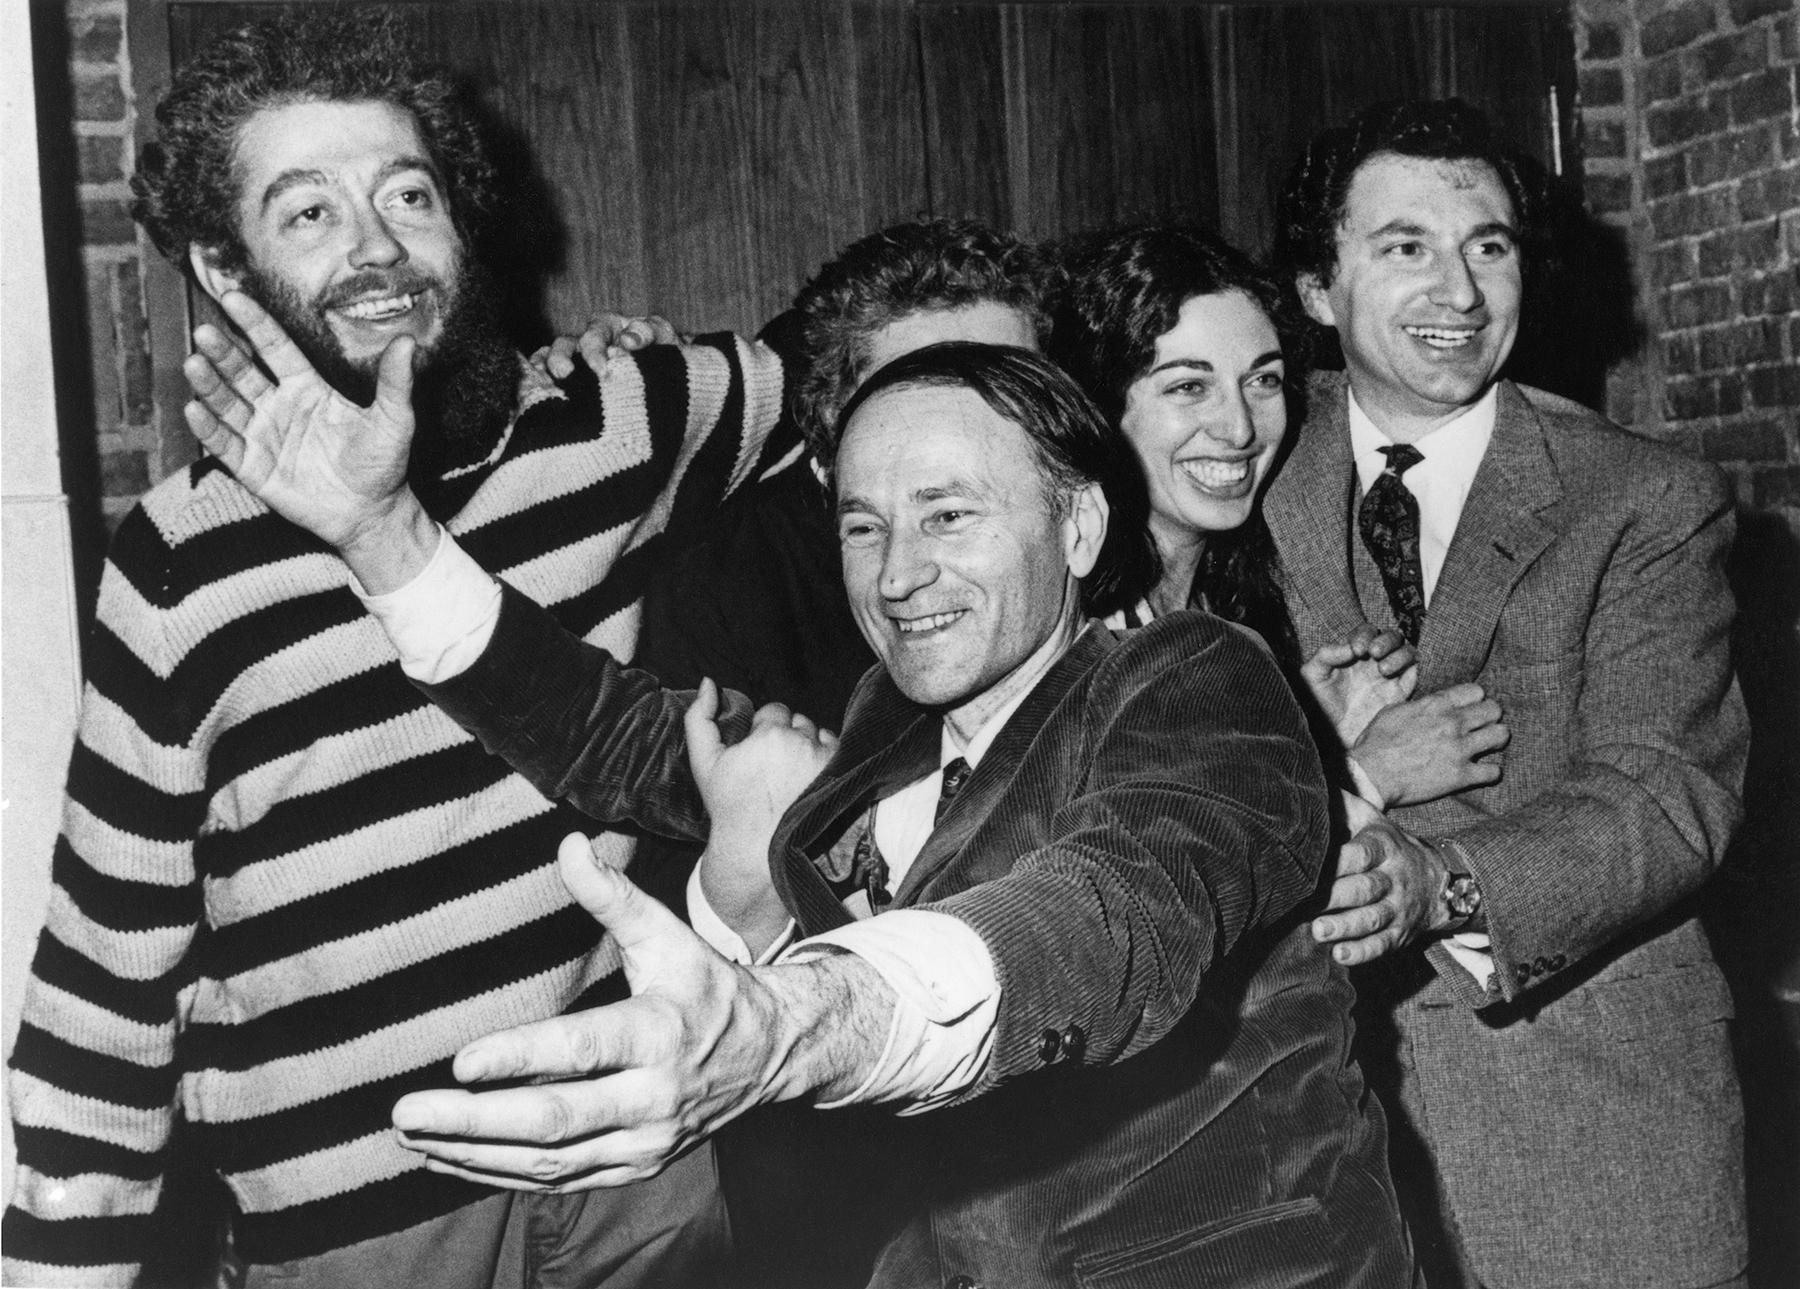 Mekas (centre) with Hollis Frampton, Peter Kubelka, Florence Jacobs and Ken Jacobs at the opening of Anthology Film Archives in 1970